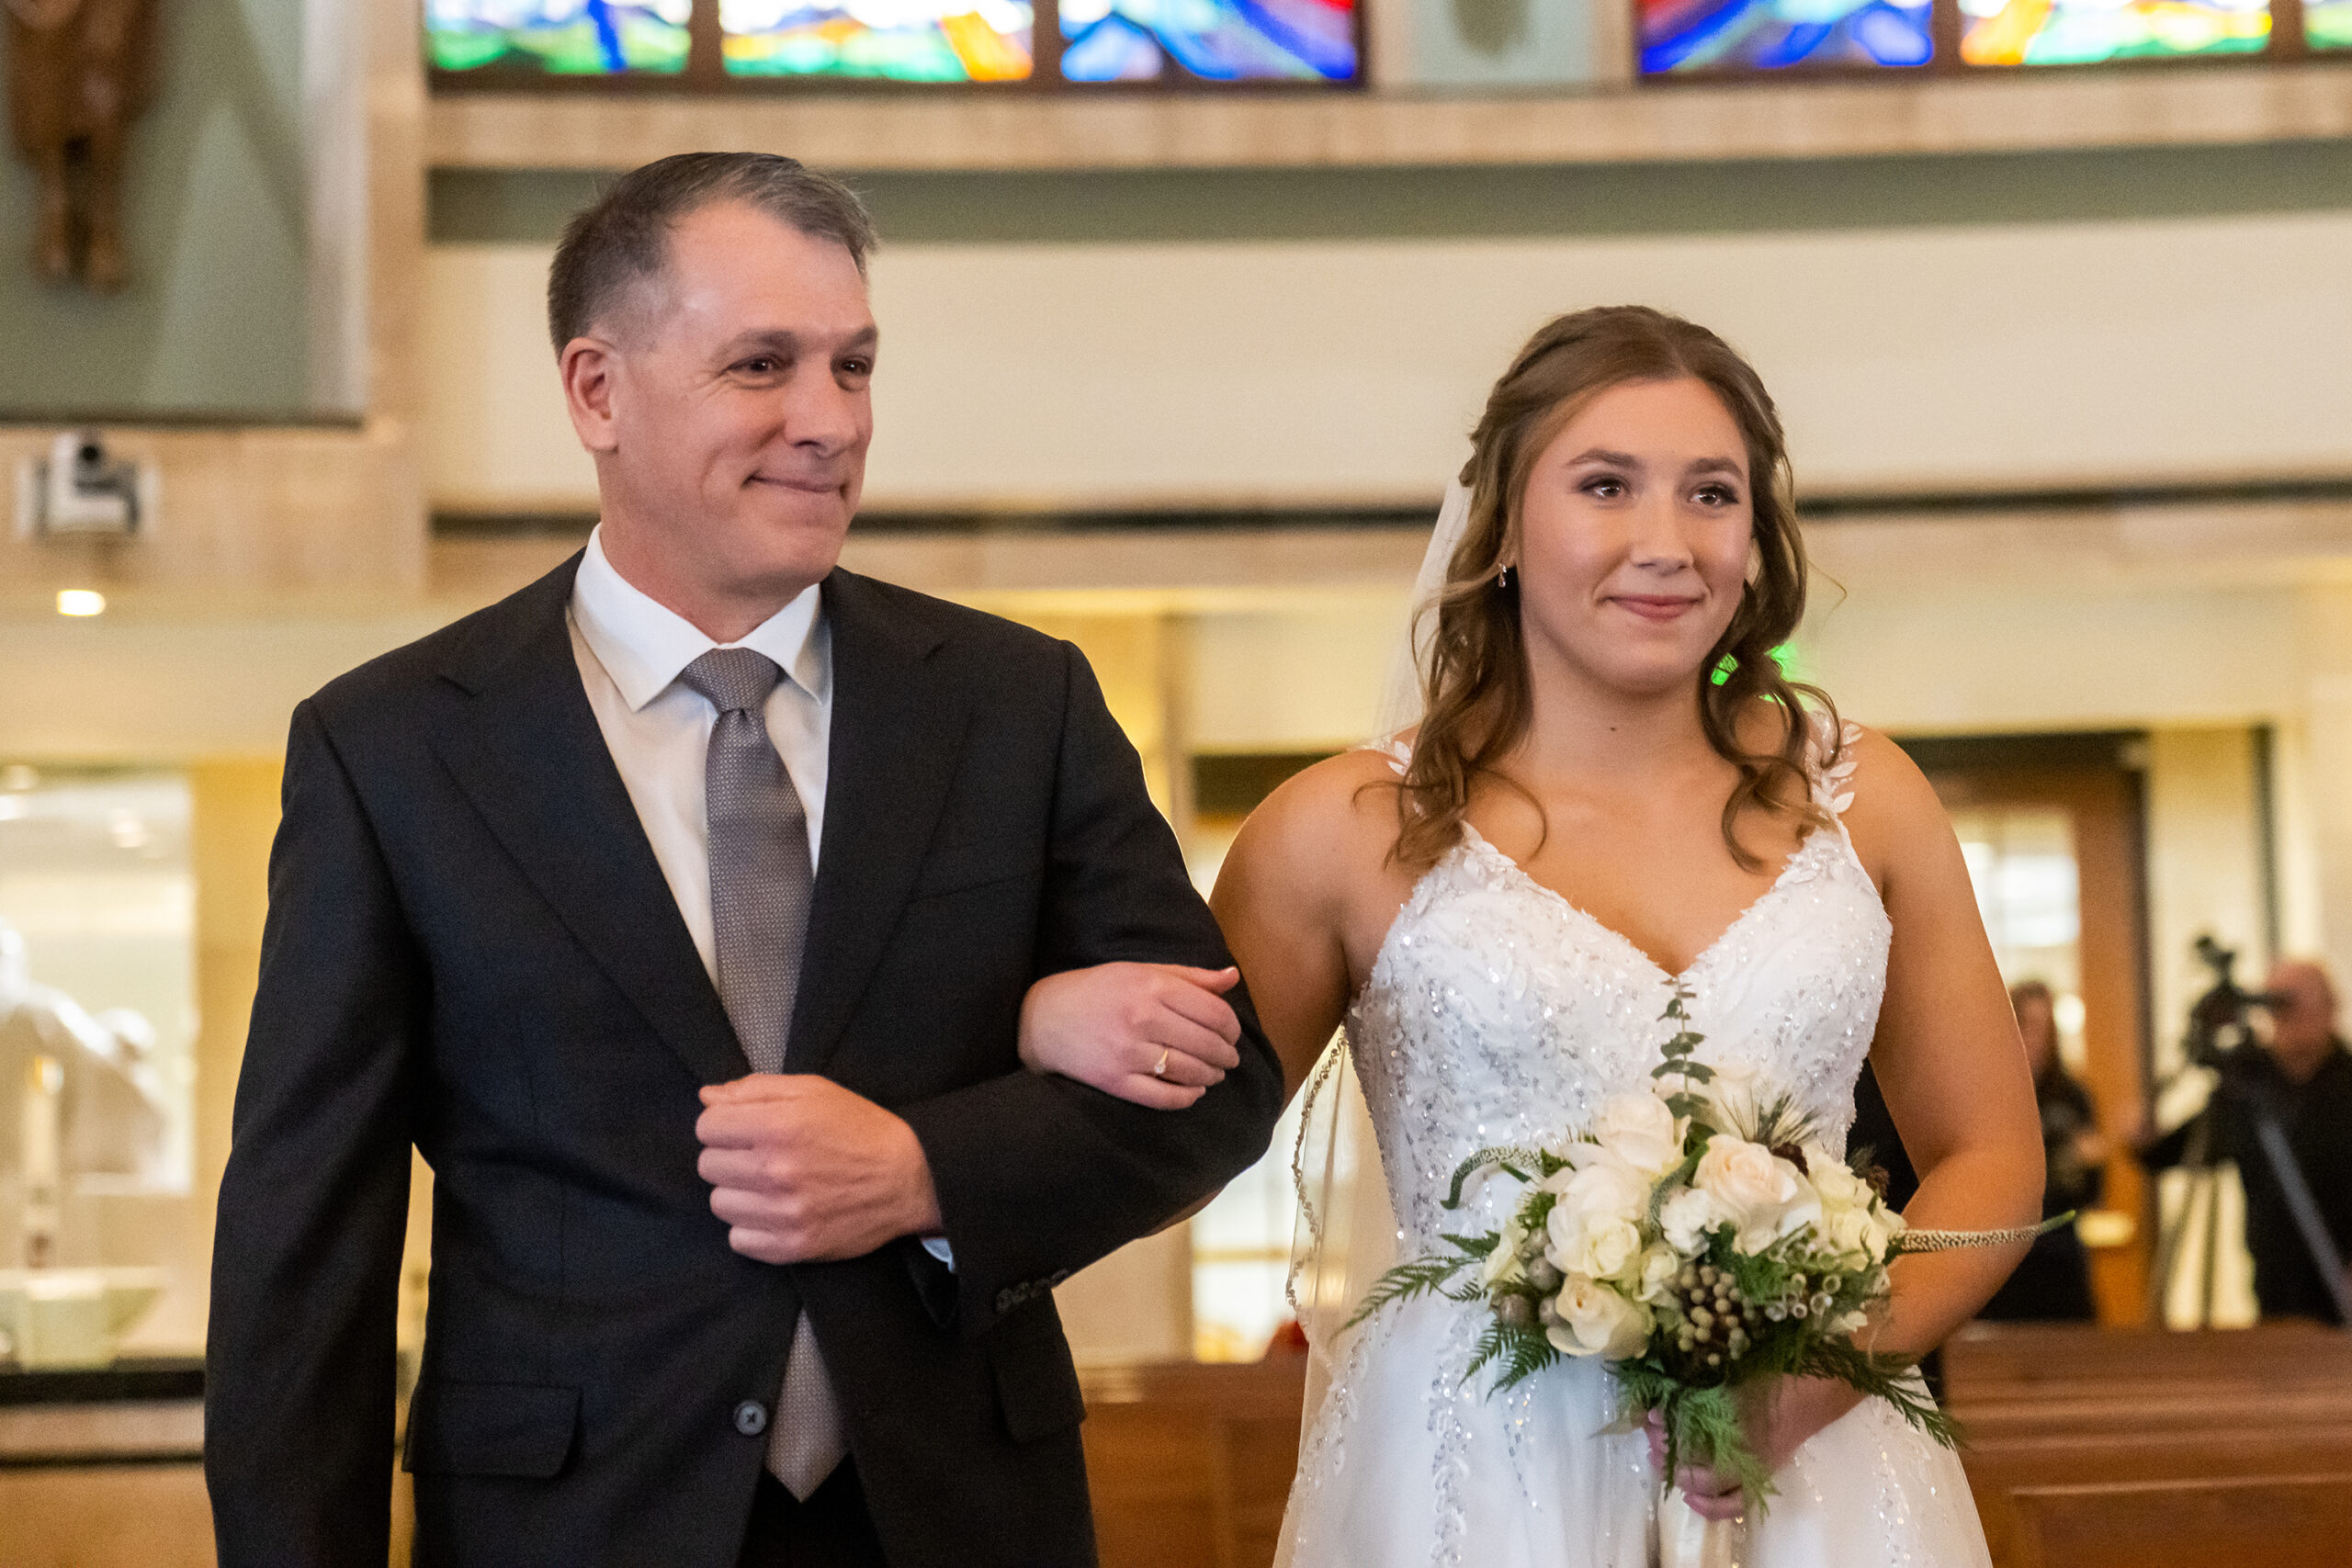 Jaime walks with her father down the aisle during her St. Thomas More Catholic Church wedding in Centennial, Colorado.